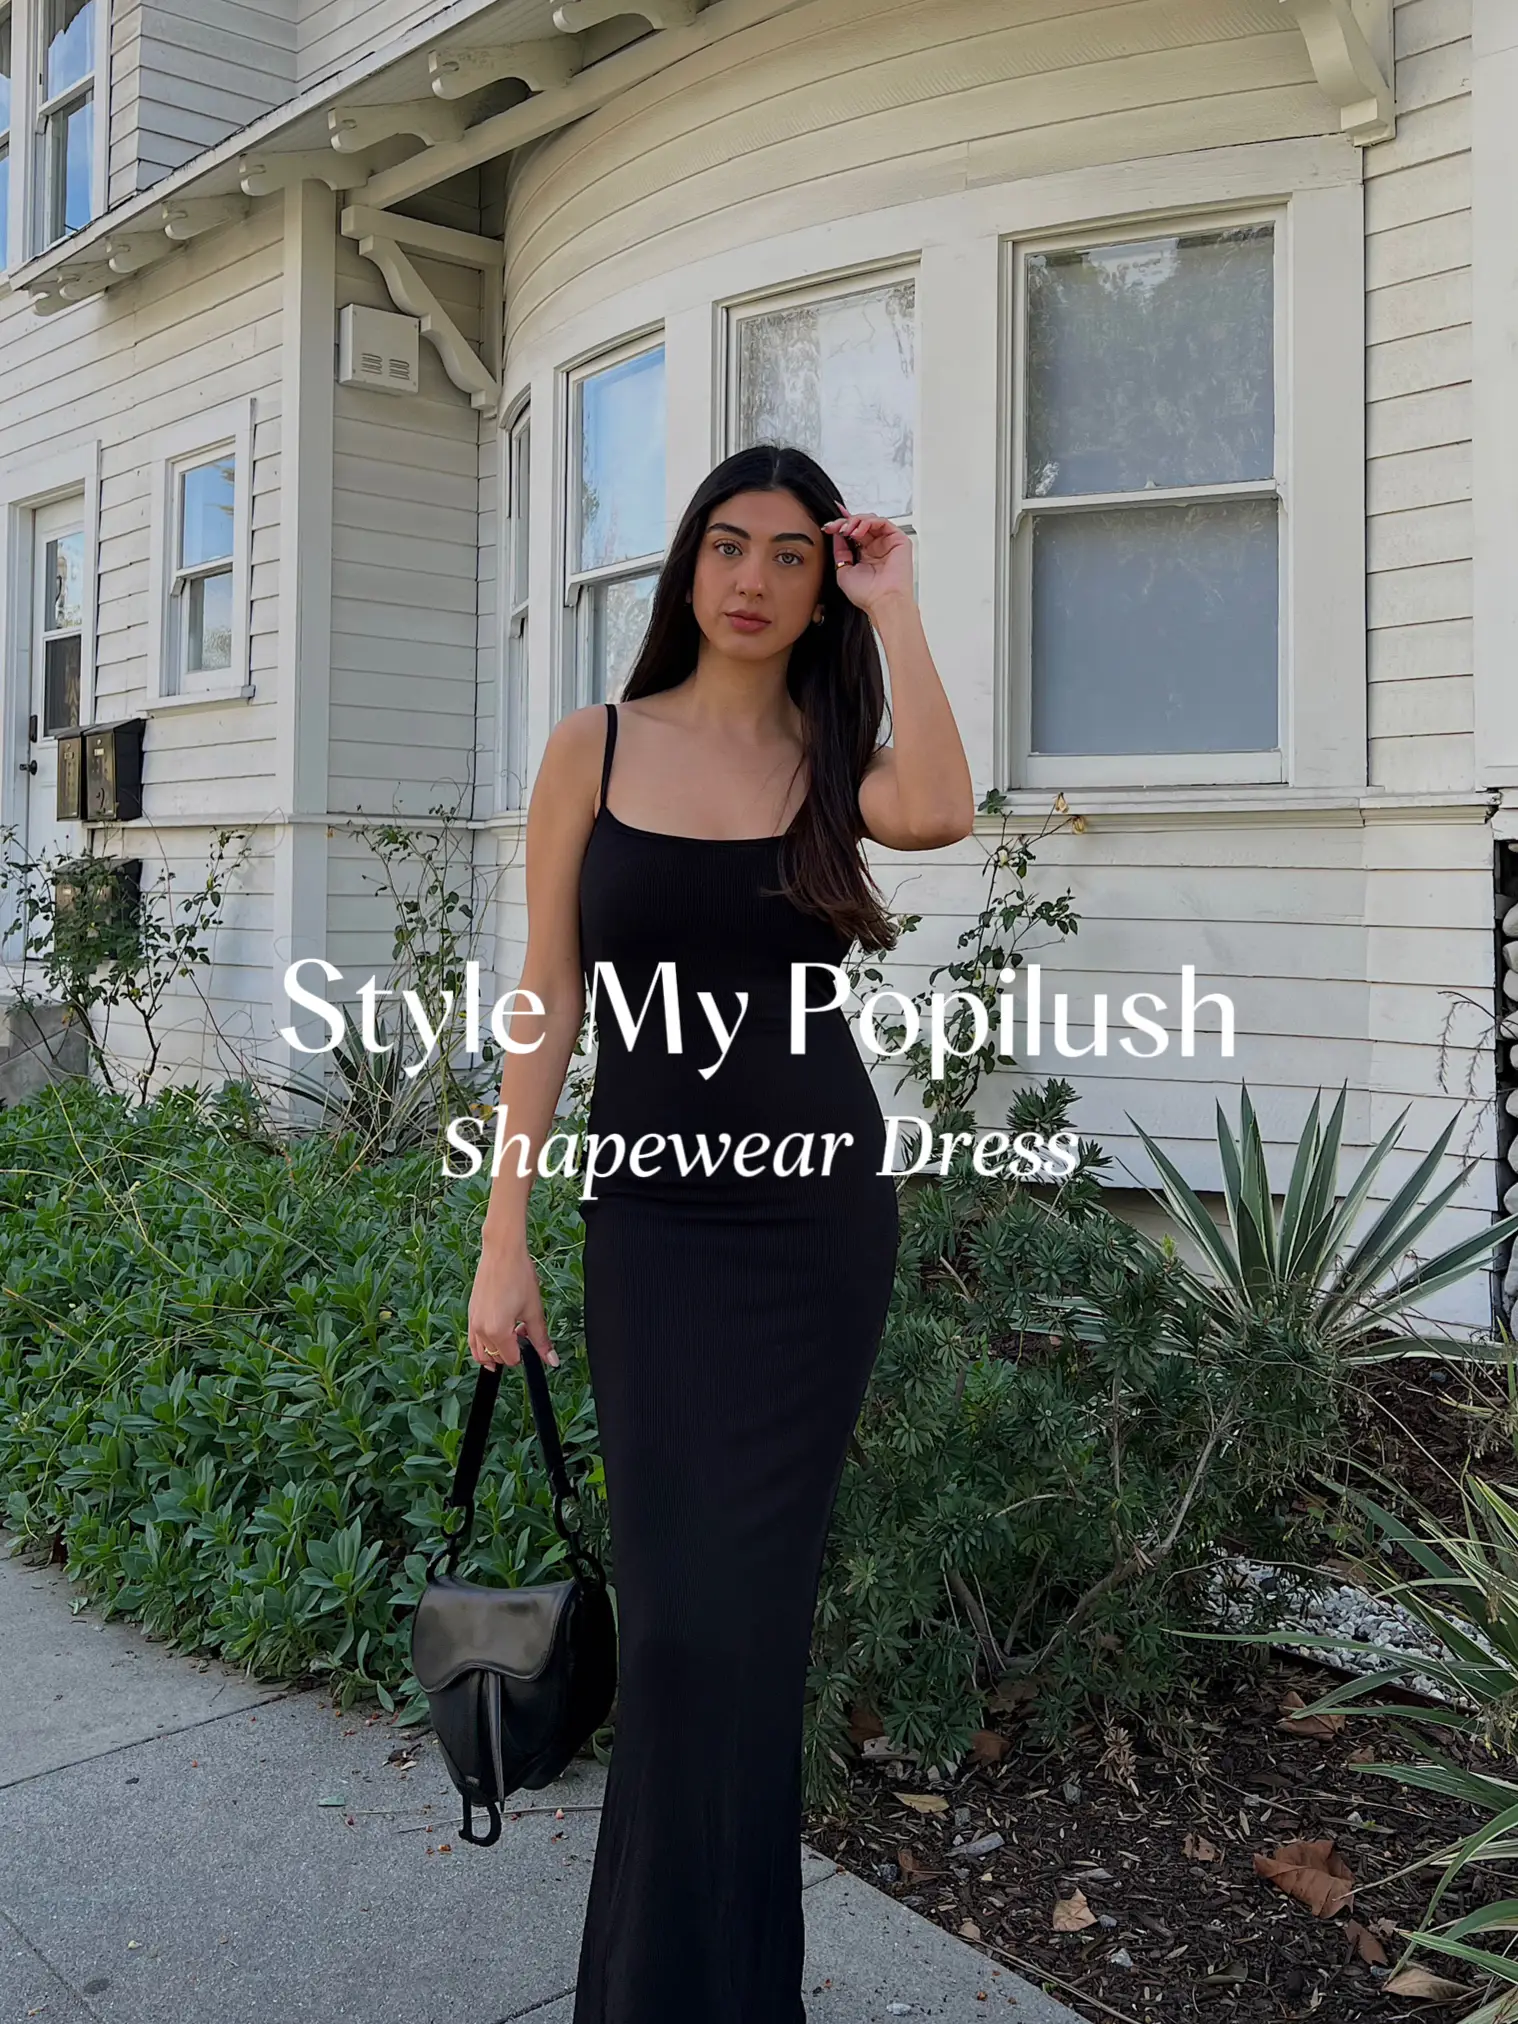 Currently obssessed with dresses that have built-in shapewear! I am we, dresses